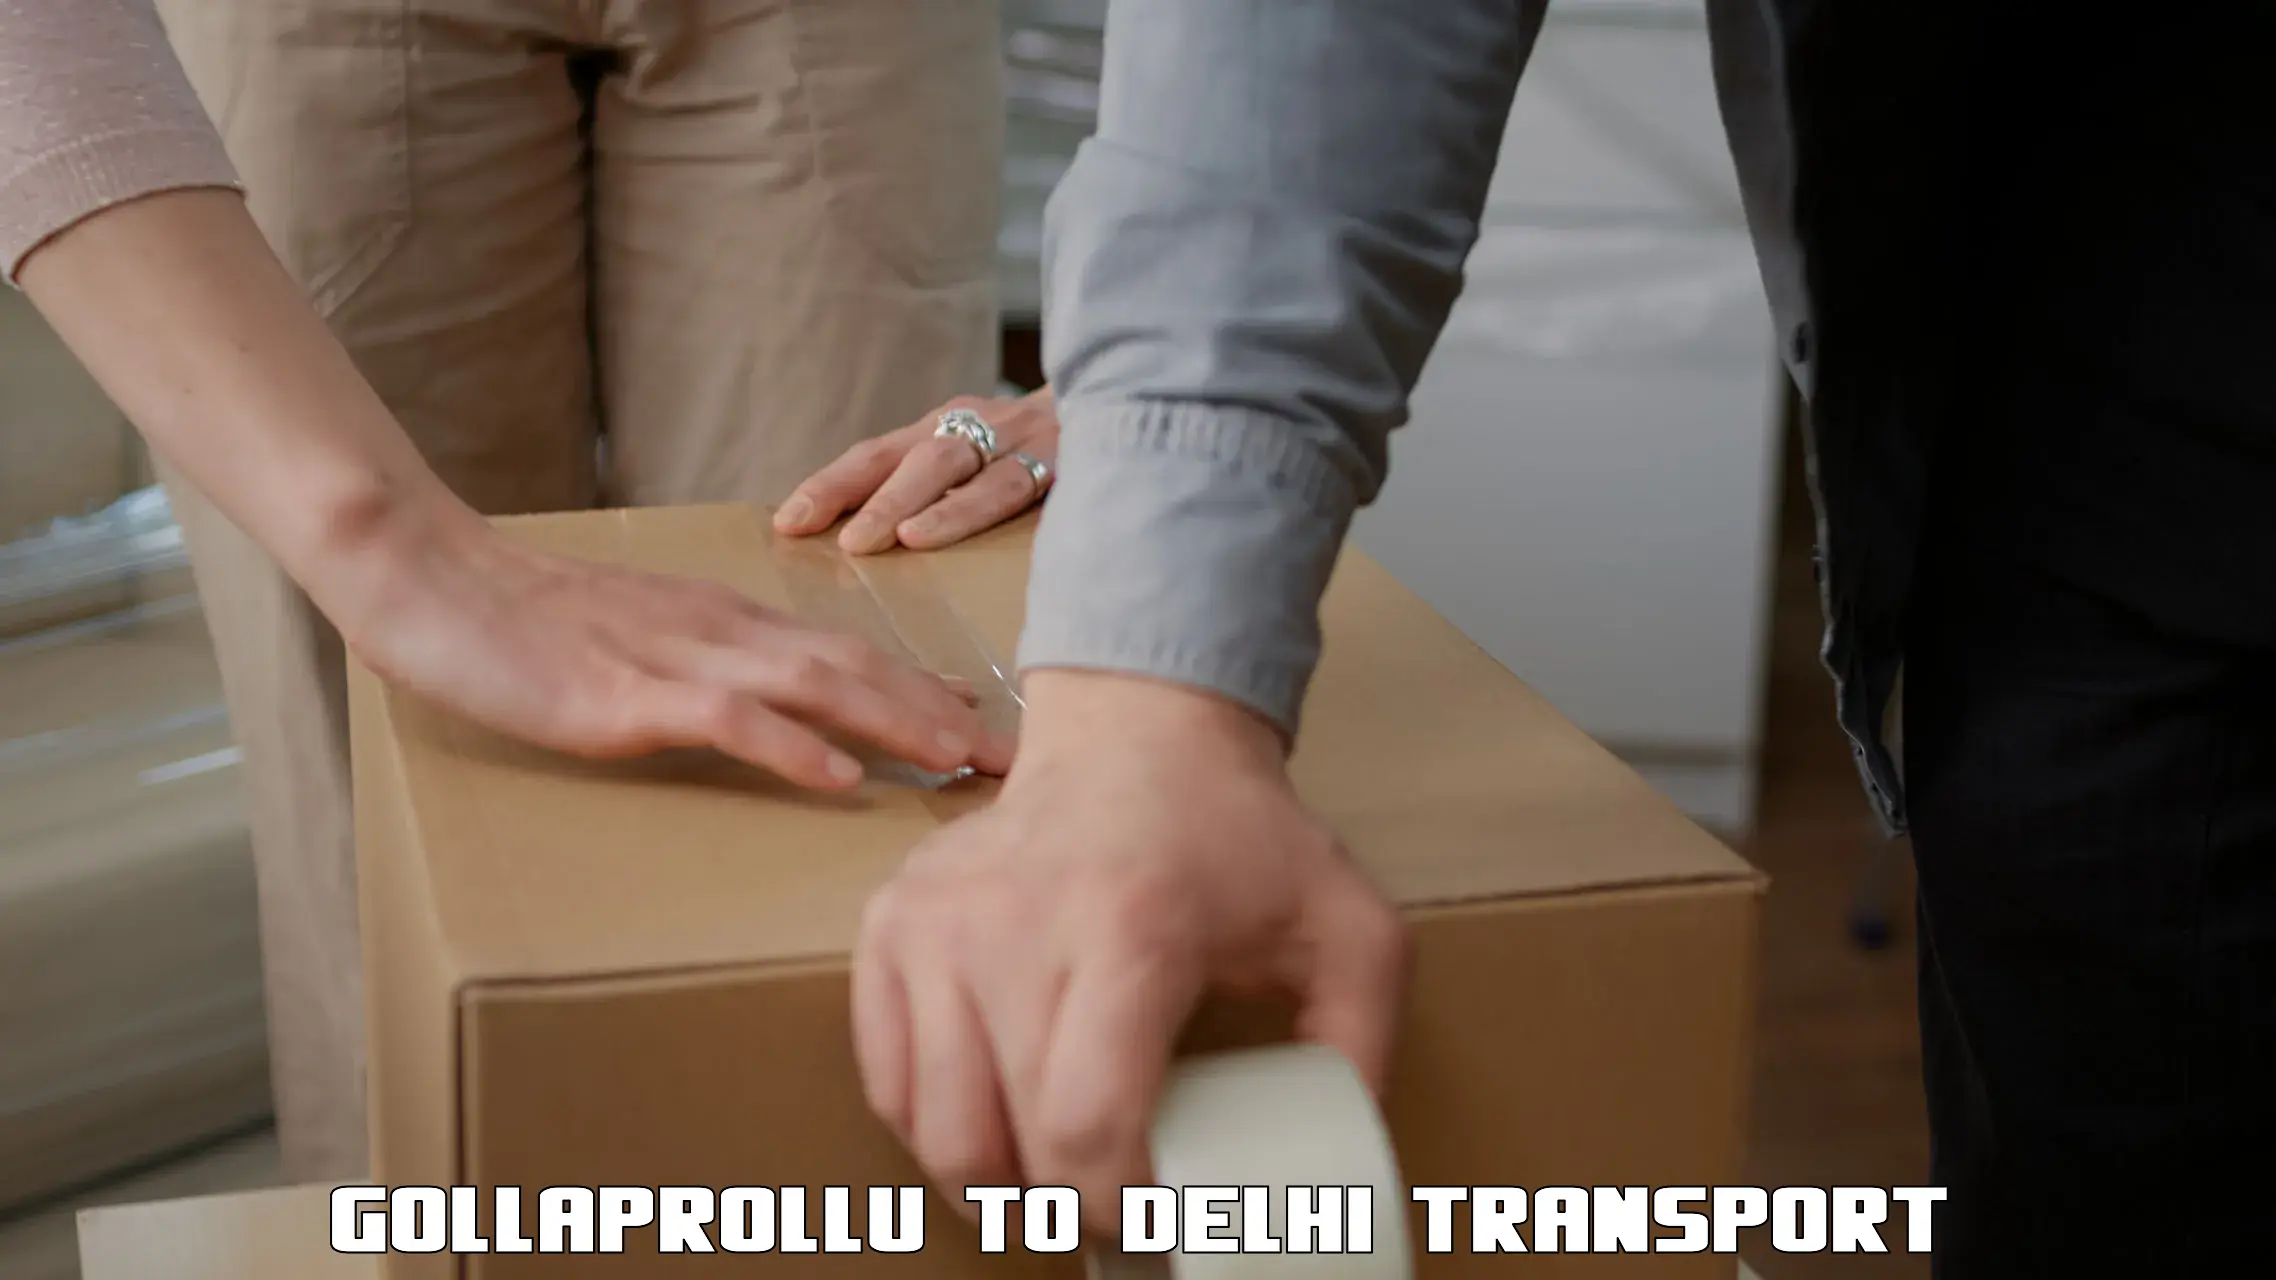 Cargo transport services Gollaprollu to Jhilmil